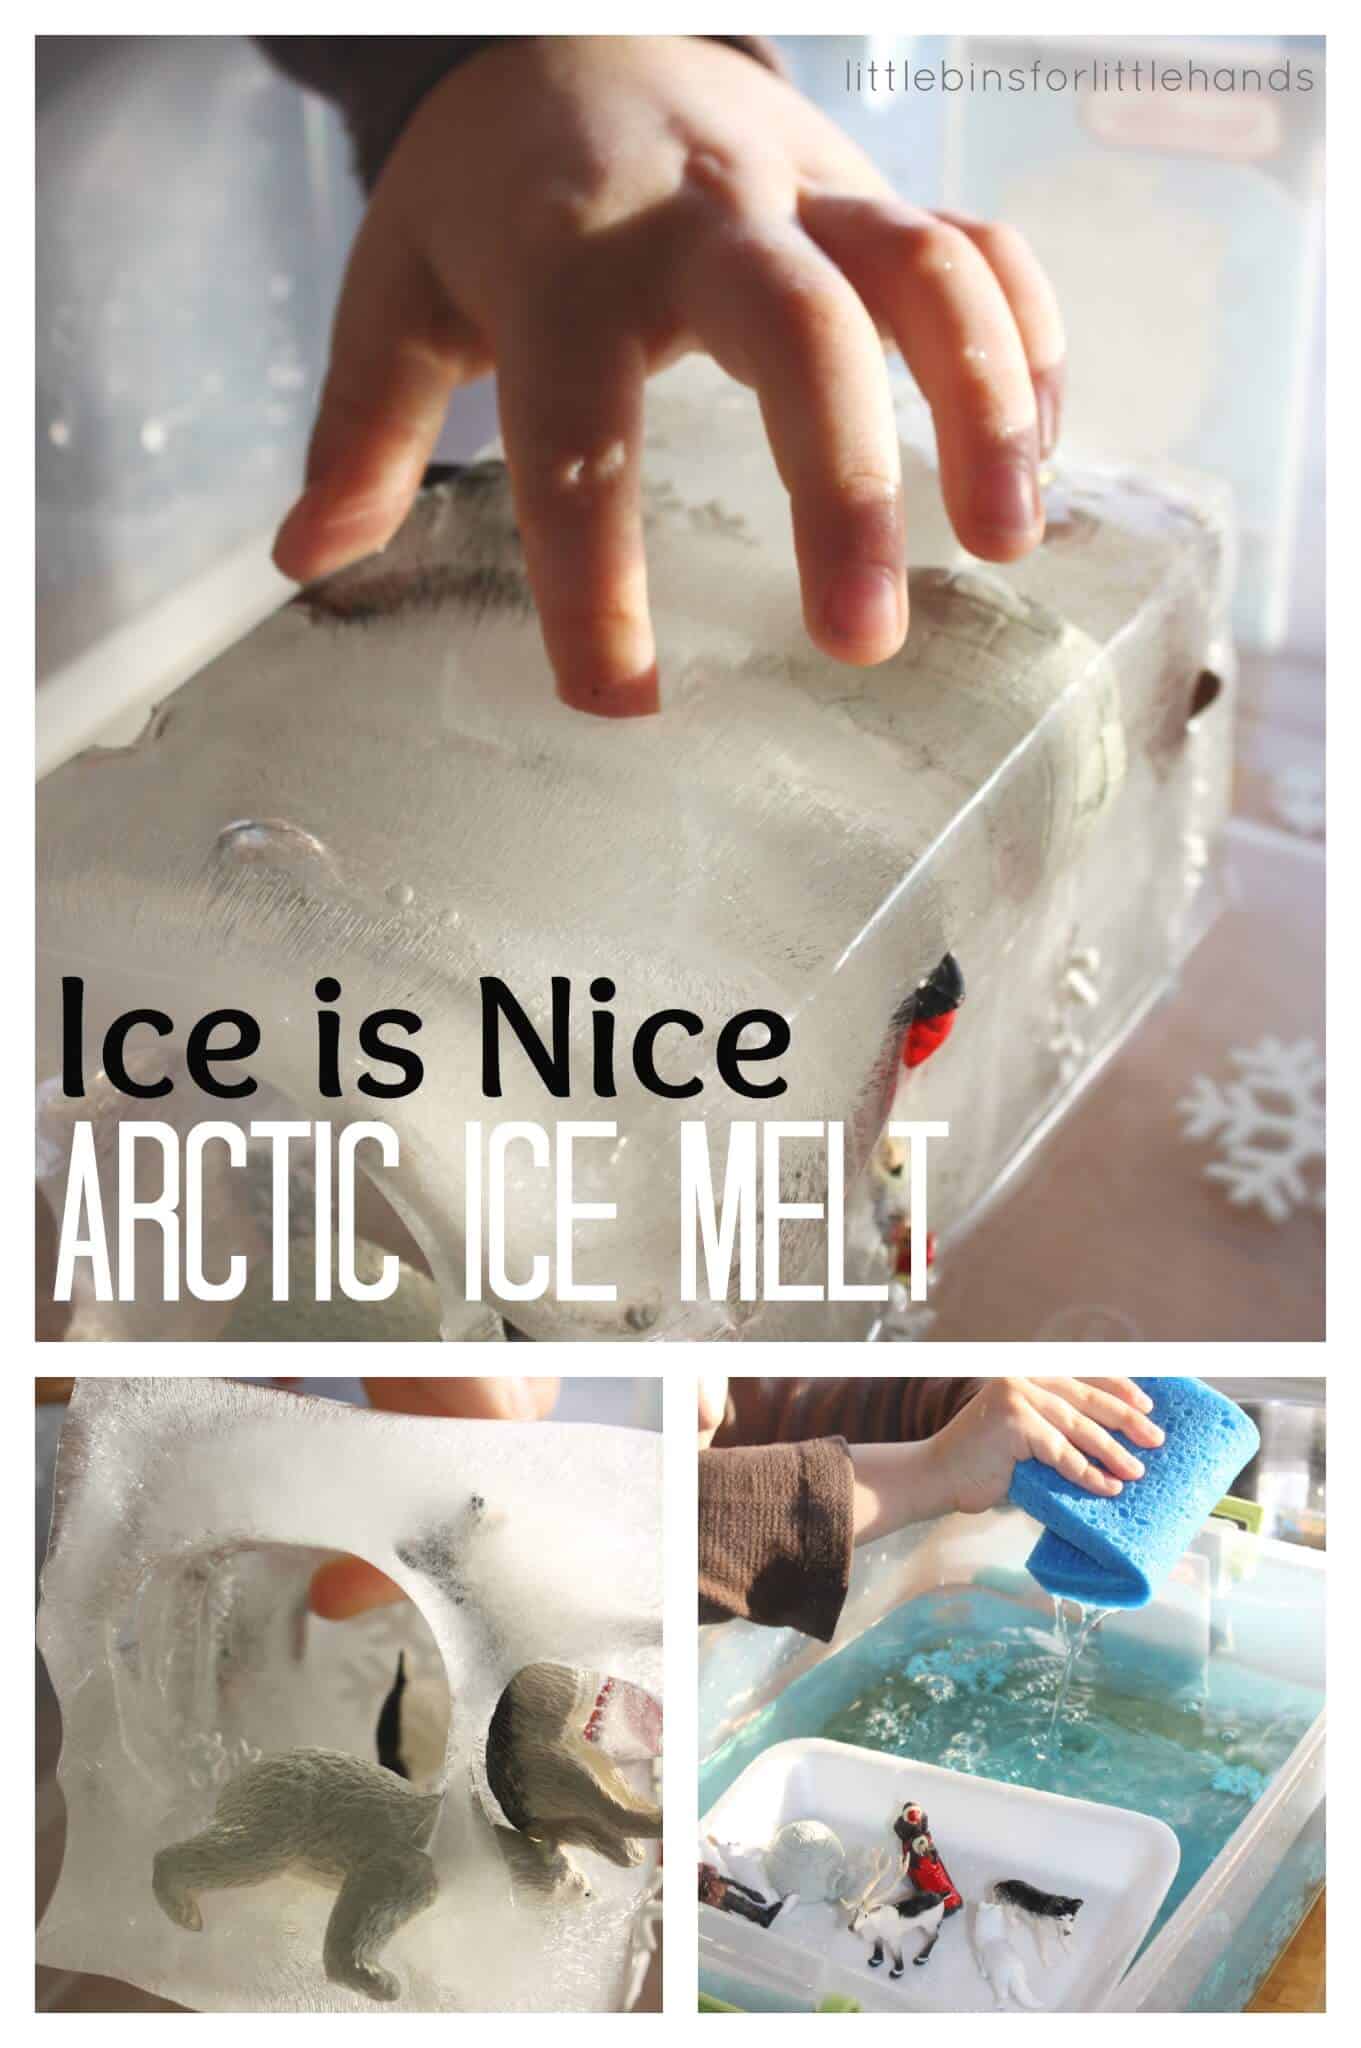 Rescue Stick Man: Icy Sensory Play • Little Pine Learners